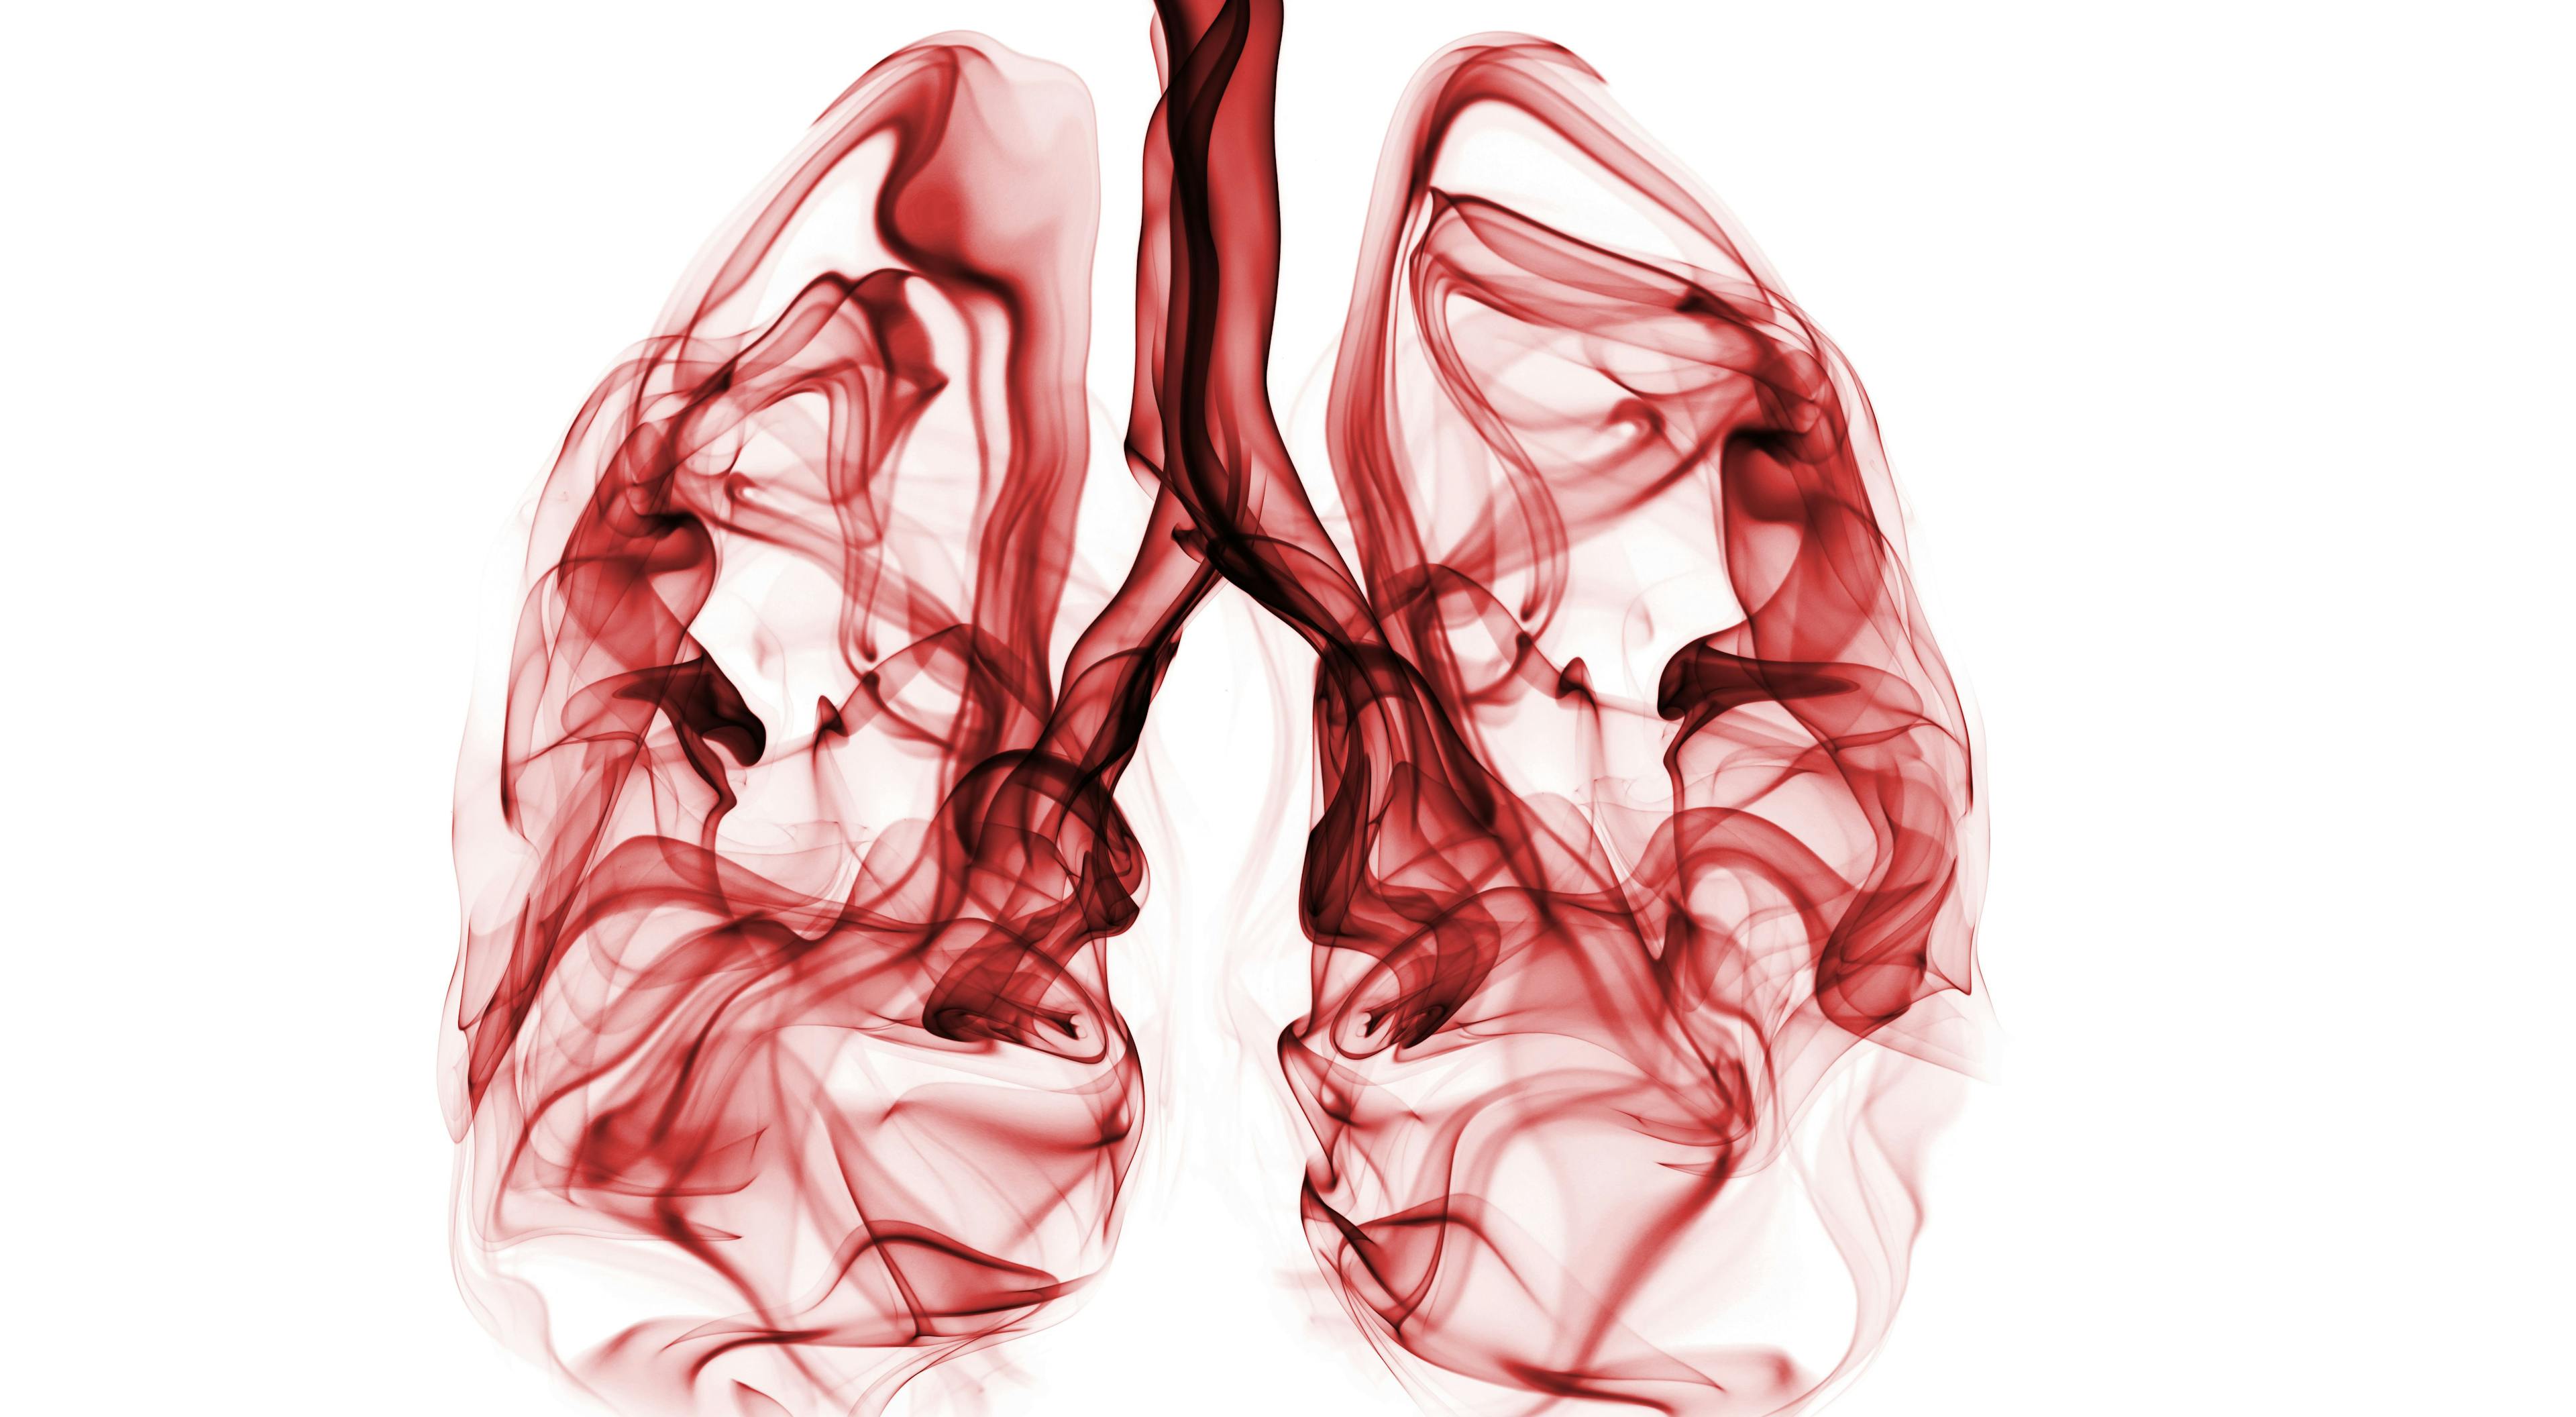 New Guidelines Aim to Improve Quality of Life For Patients With Advanced Lung Cancer